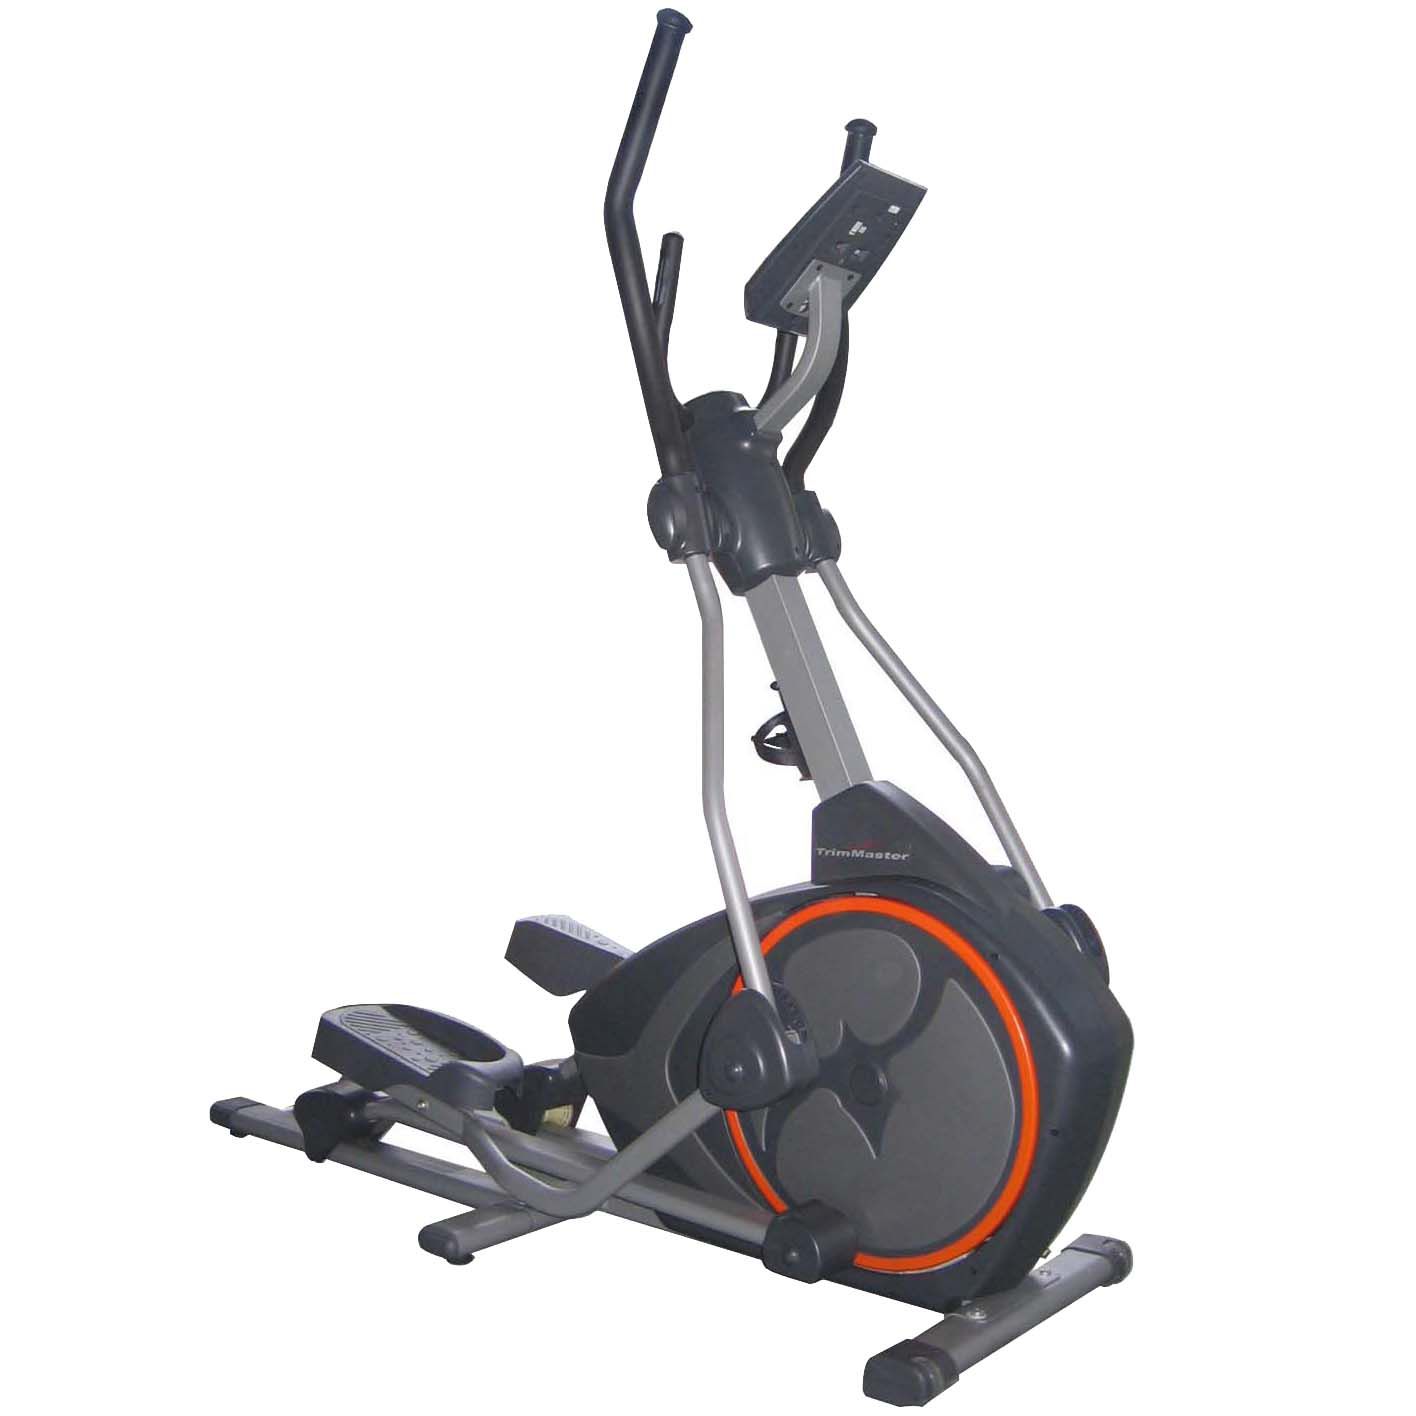 TrimMaster E418 Cross Trainer at John Lewis